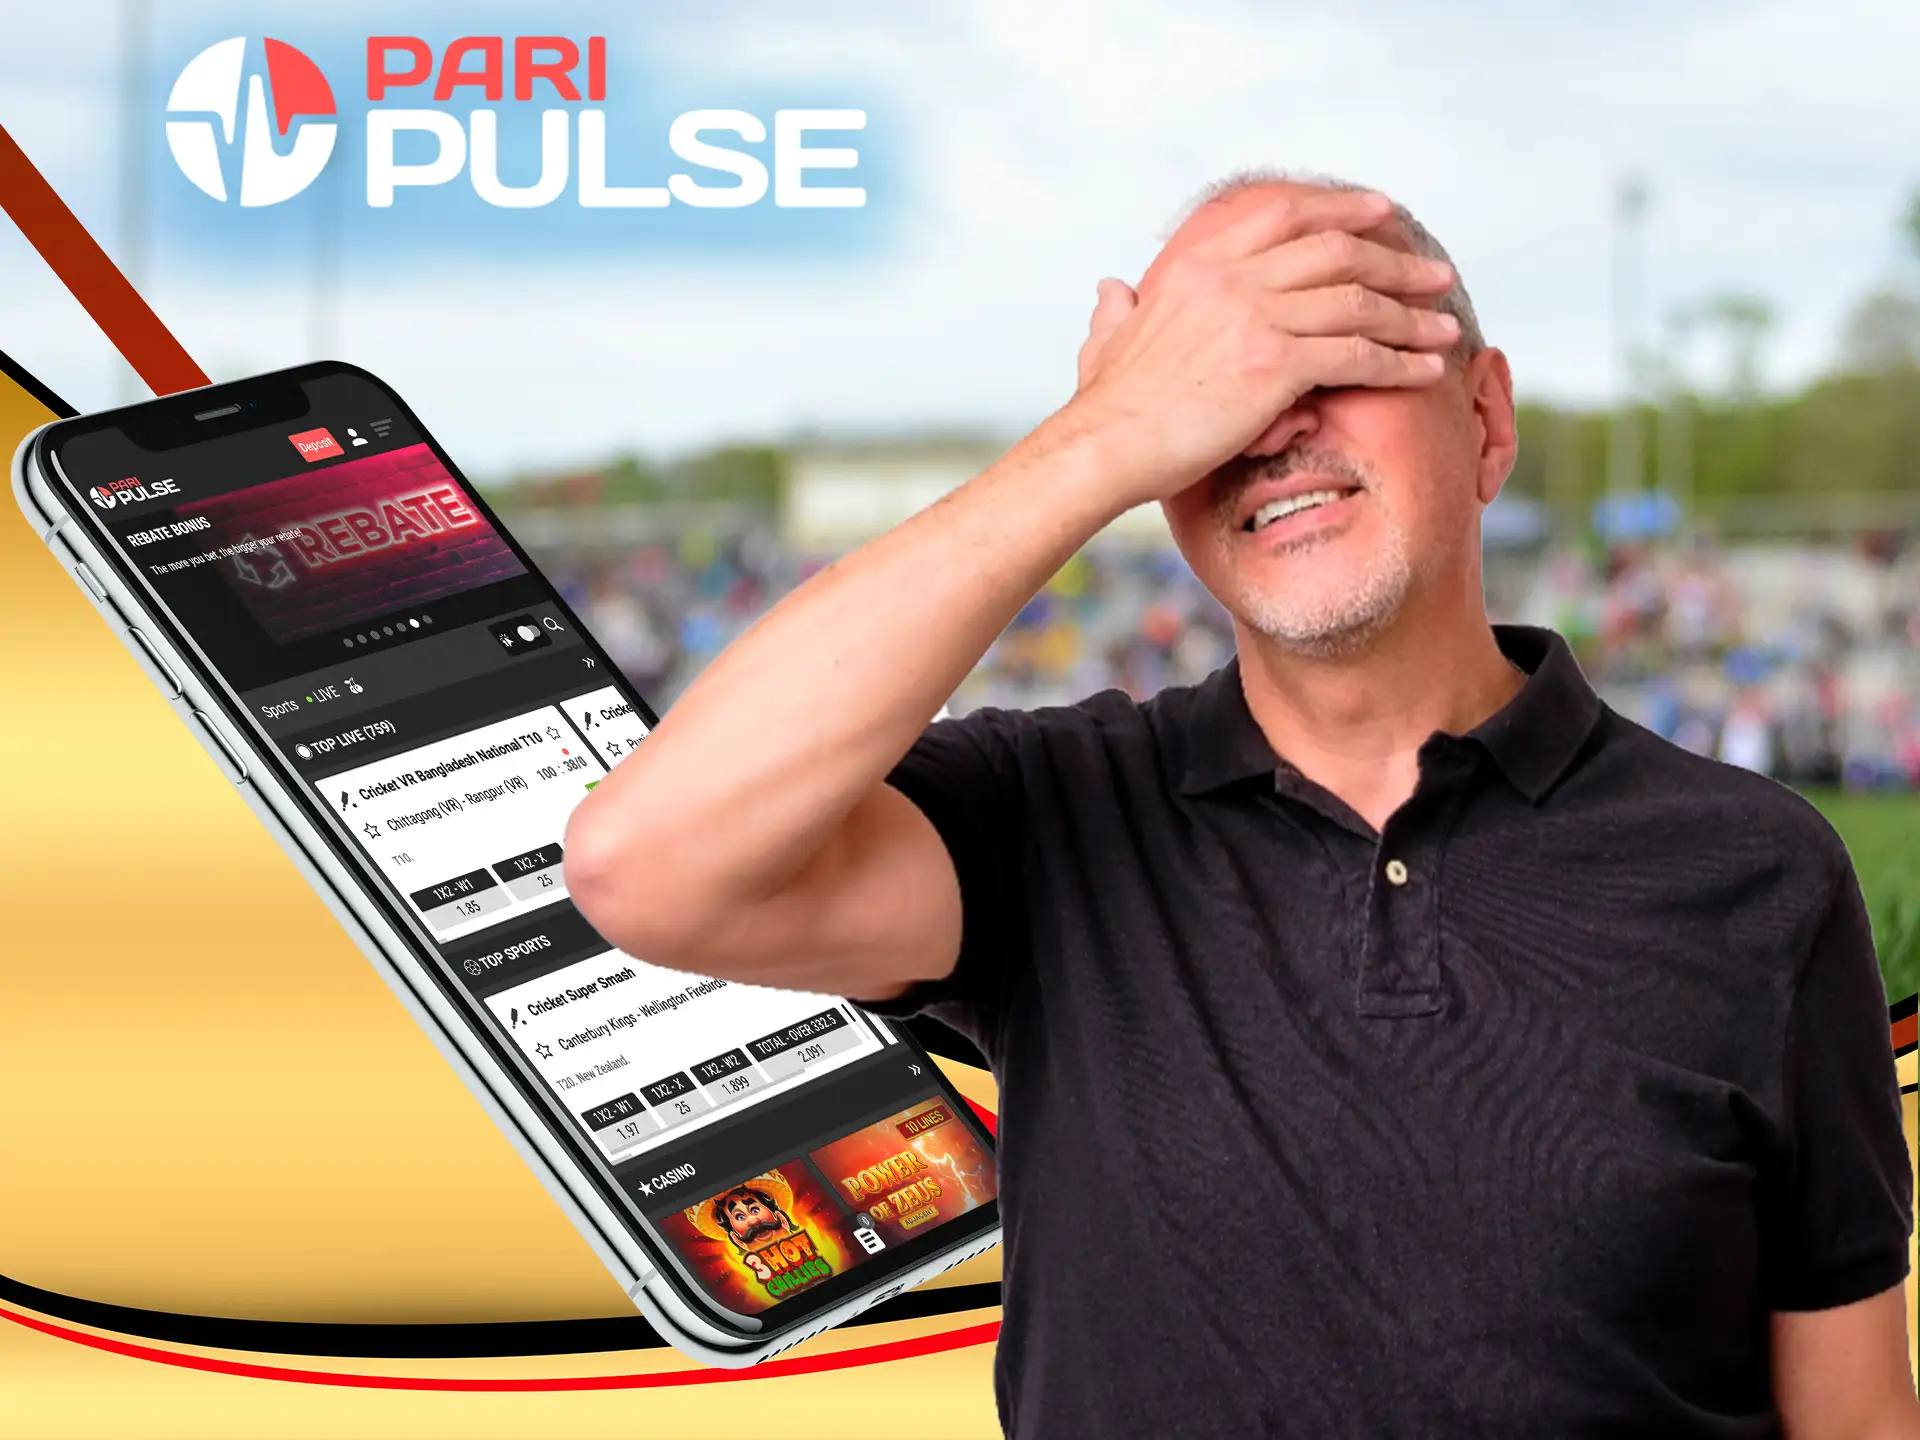 PariPulse helps users to control themselves, allows them to play only from the age of 18, as well as control betting costs.